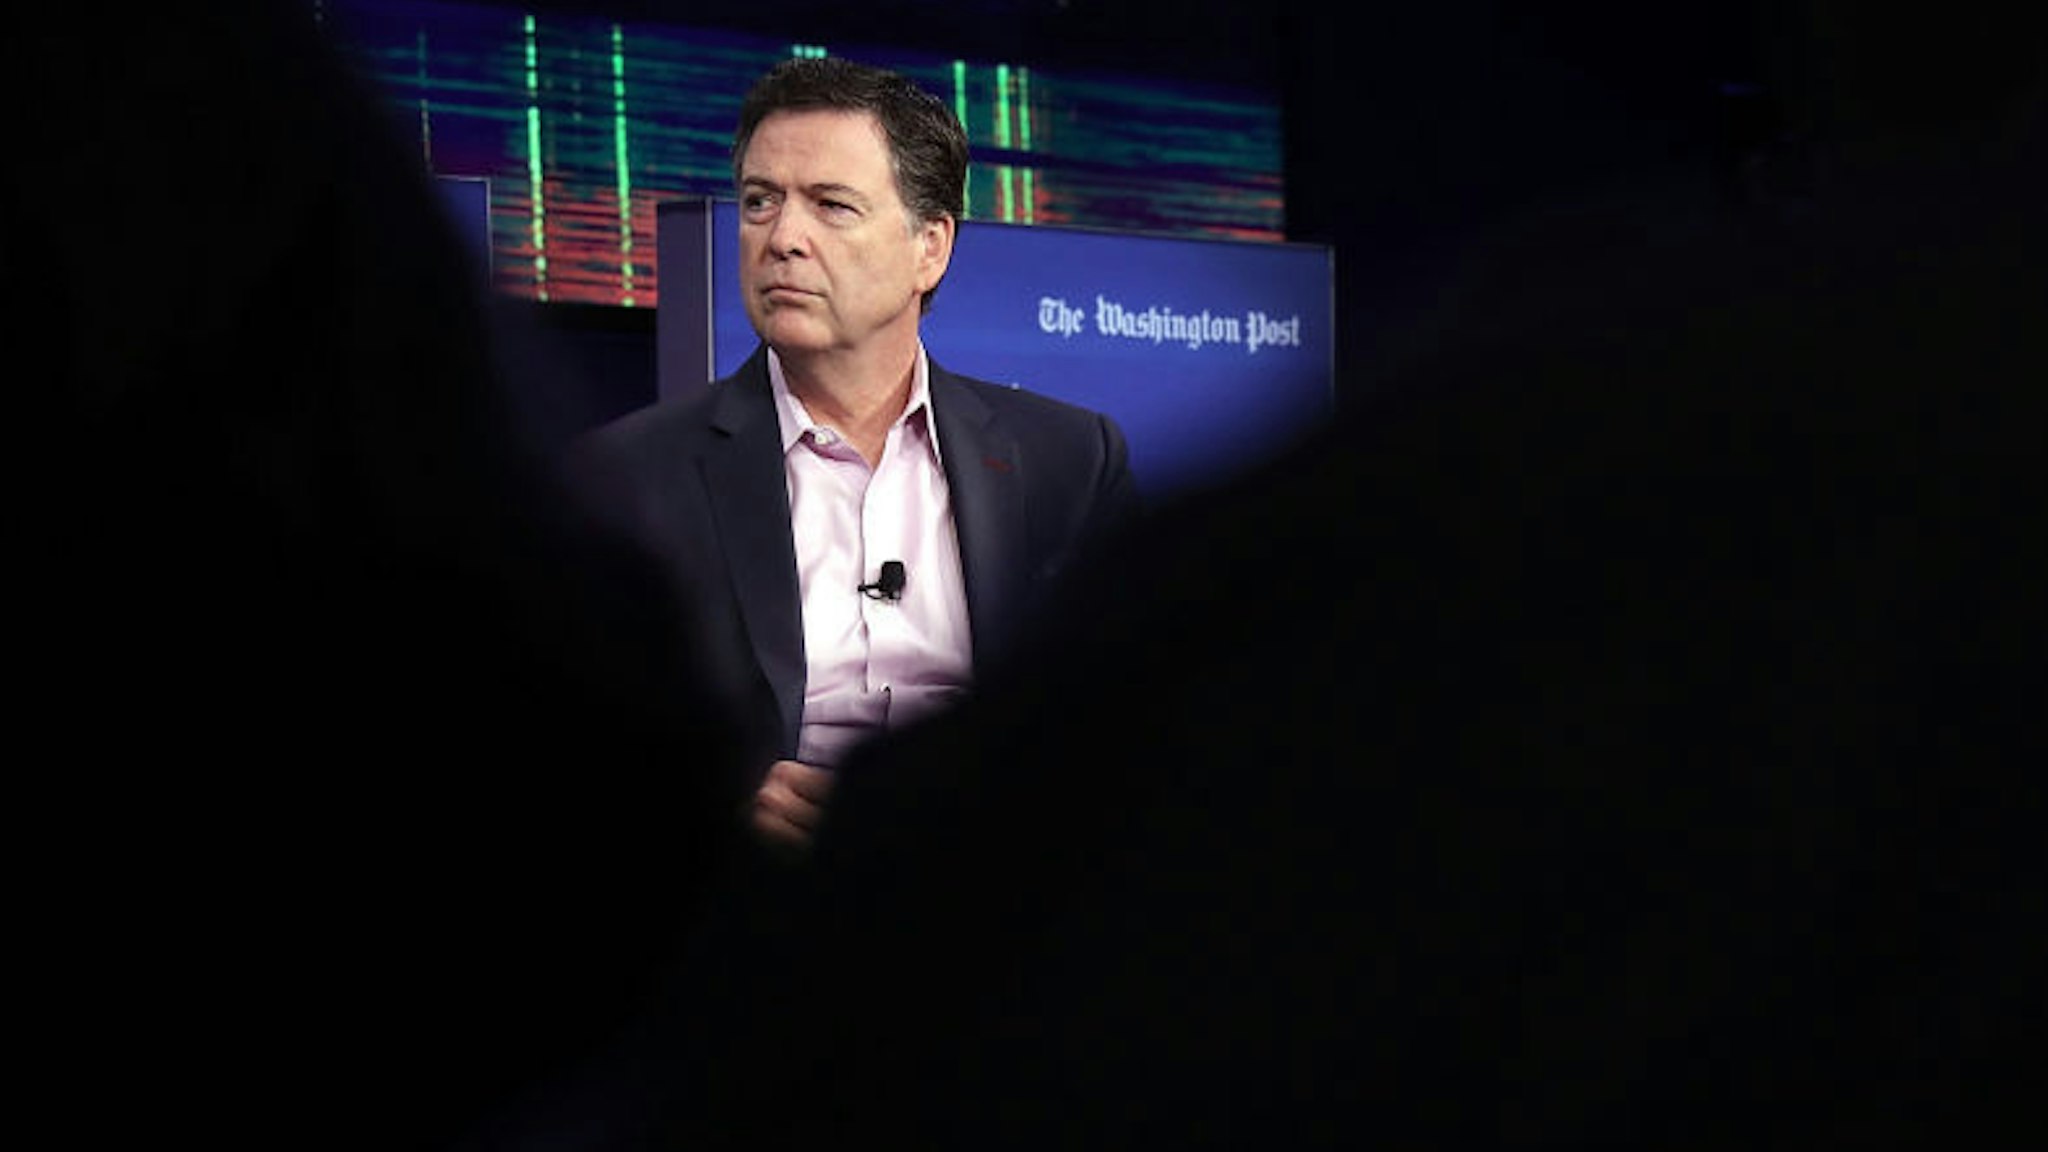 Former FBI director James Comey answers questions during an interview forum at the Washington Post May 8, 2018 in Washington, DC. Comey discussed his stormy tenure as head of the FBI, his handling of the Hillary Clinton email investigation, his tense relationship with President Trump and his controversial firing a year ago, during the forum. (Photo by Win McNamee/Getty Images)